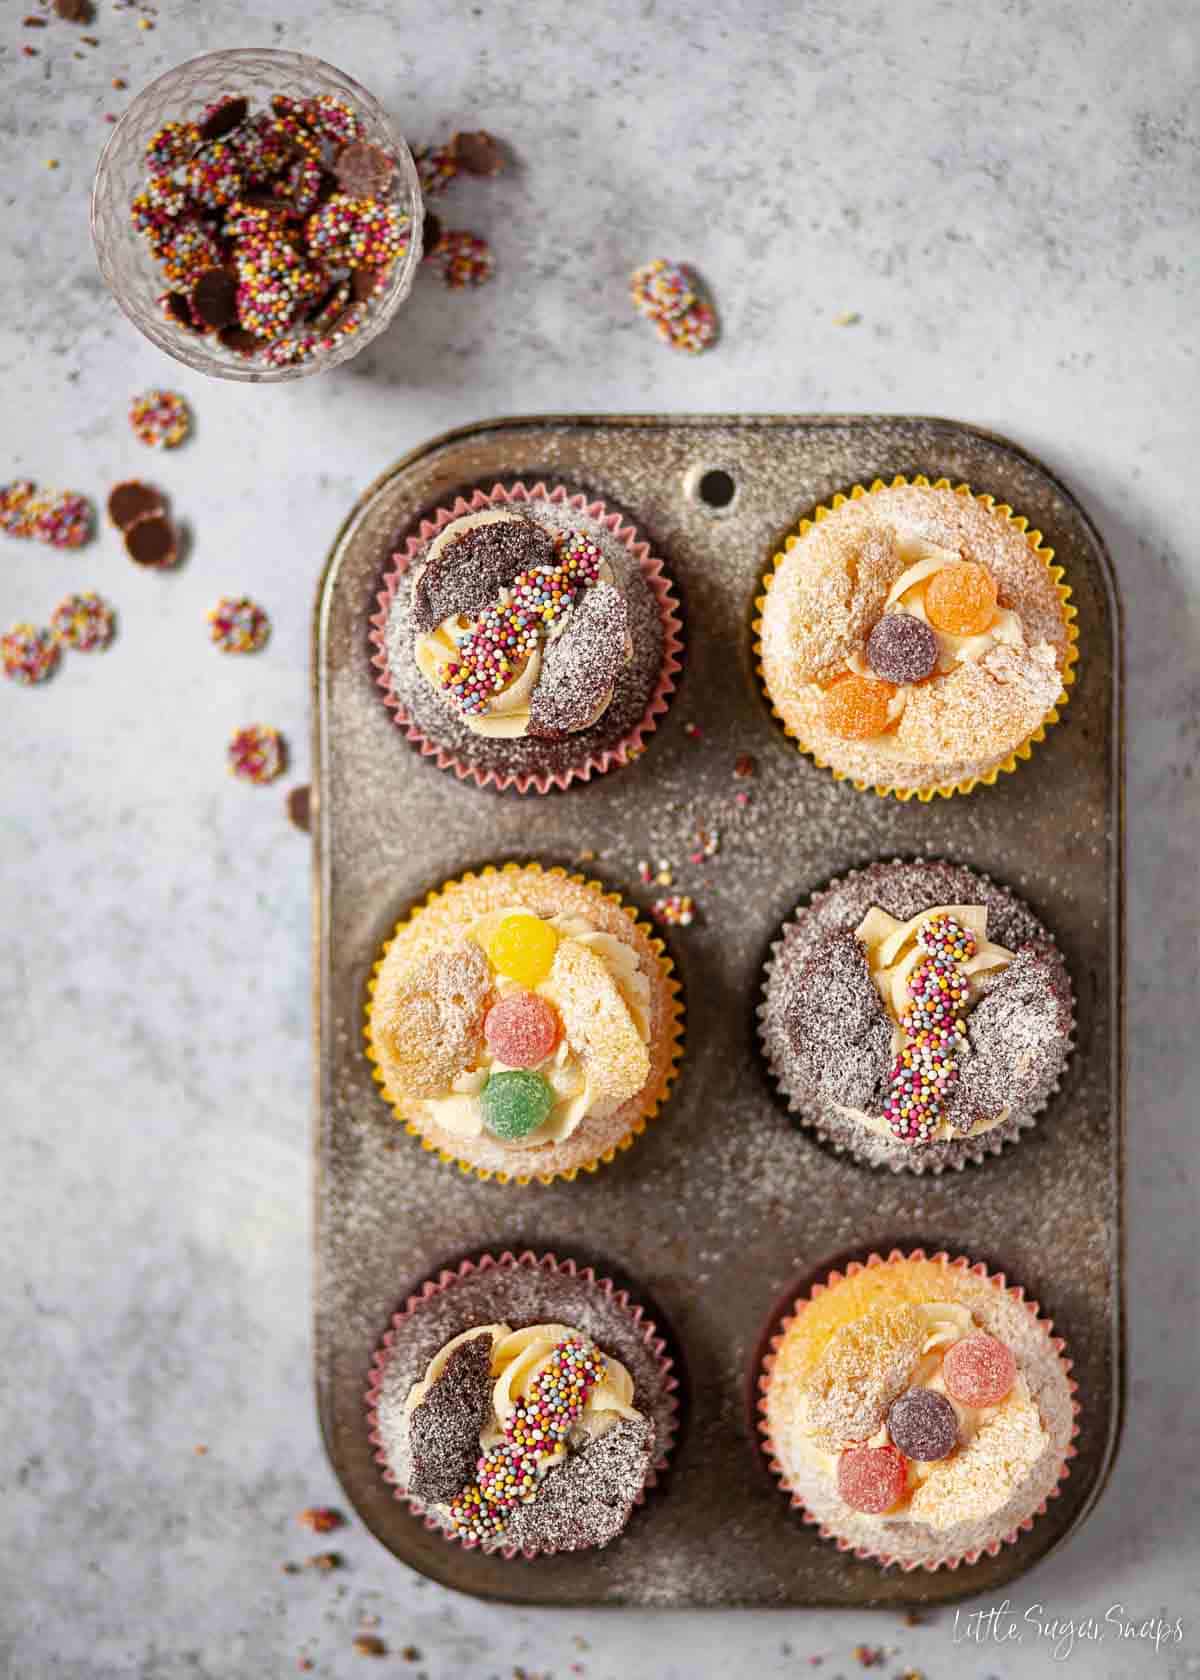 Vanilla and chocolate butterfly cakes in a baking tin.